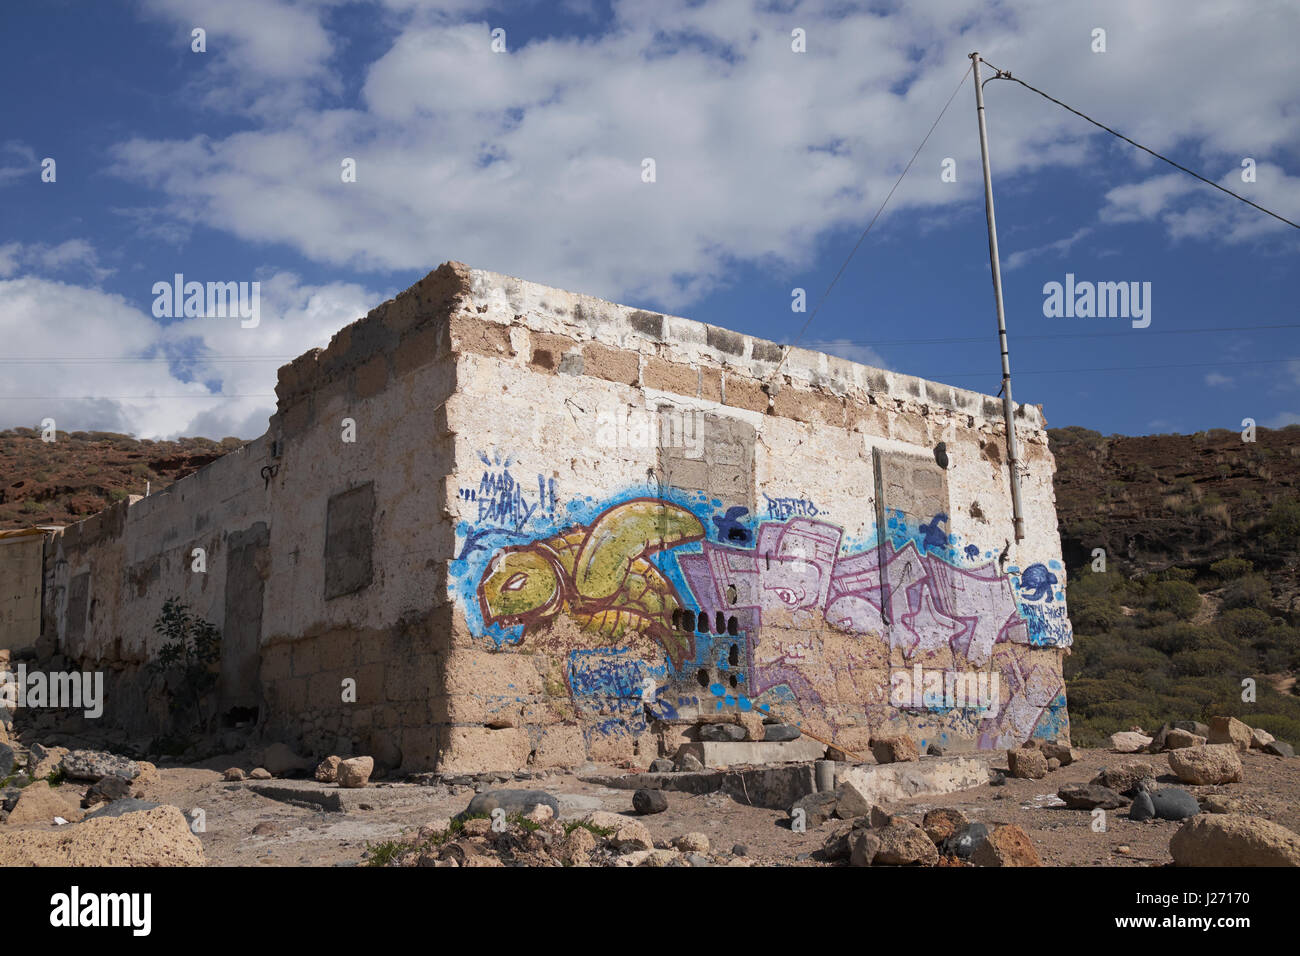 Derelict building with graffiti at El Puertito, Tenerife, Canary Islands, Spain. Stock Photo